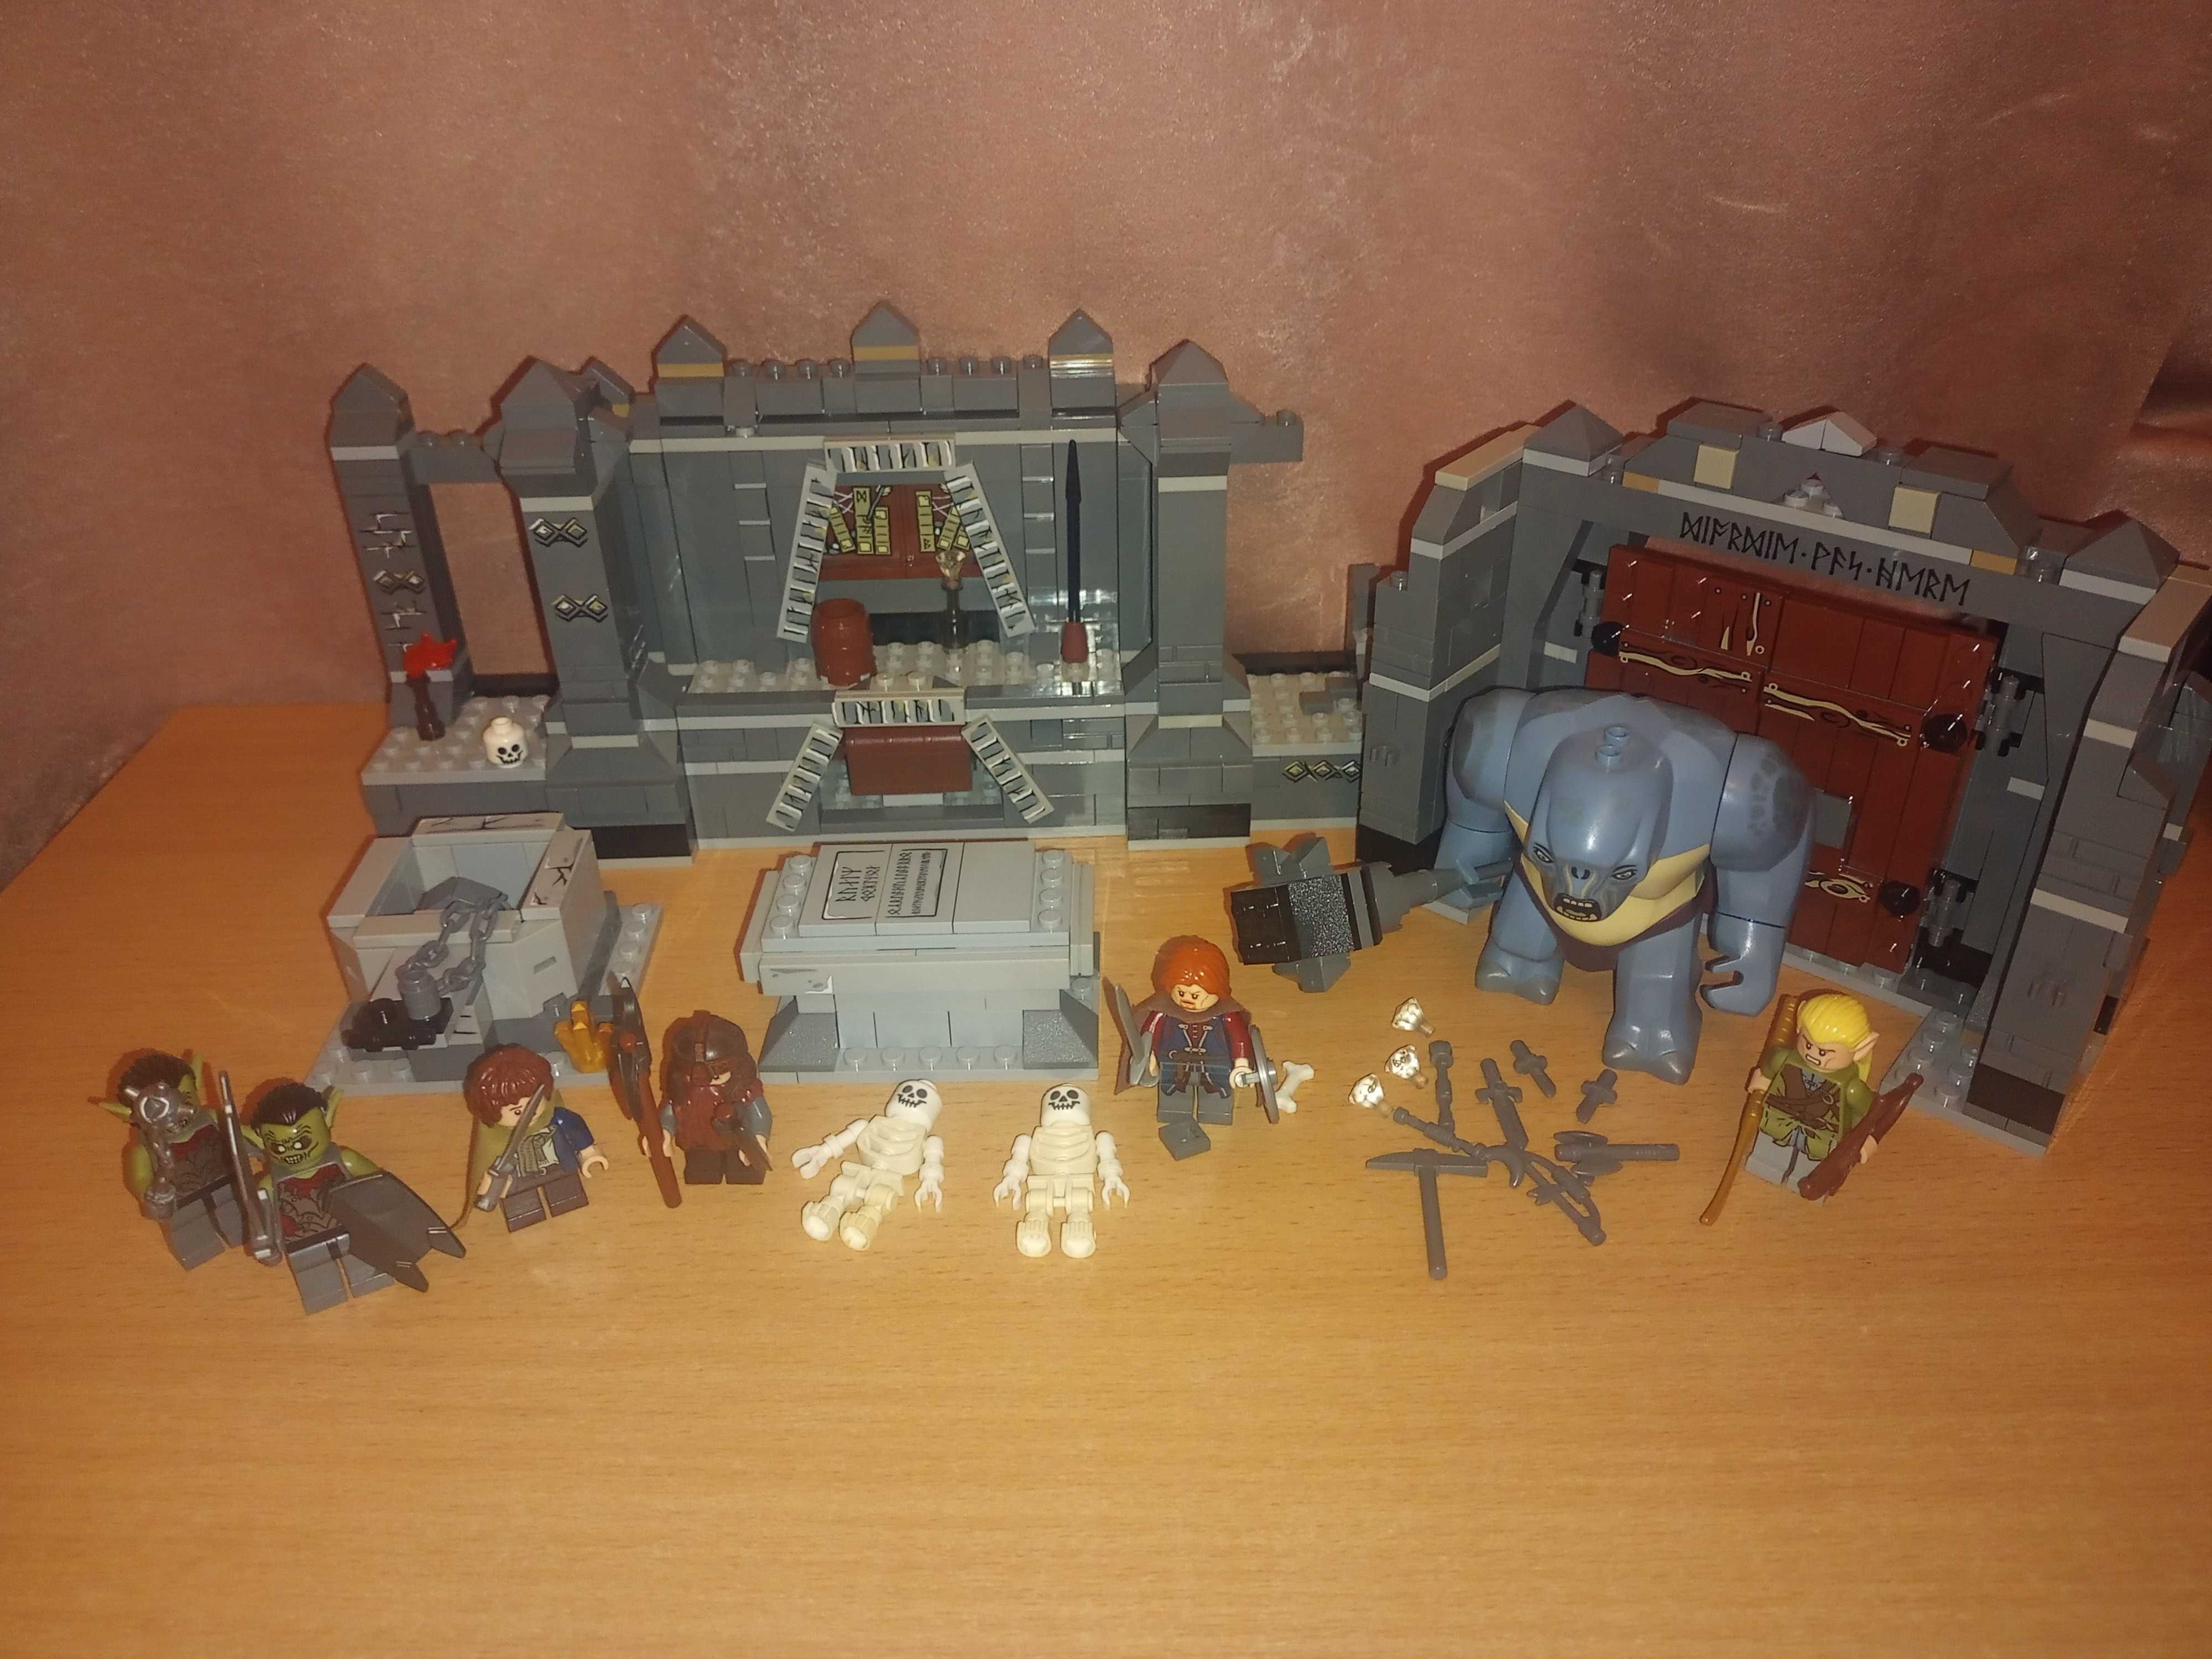 Lego Star Wars, Lord of the rings